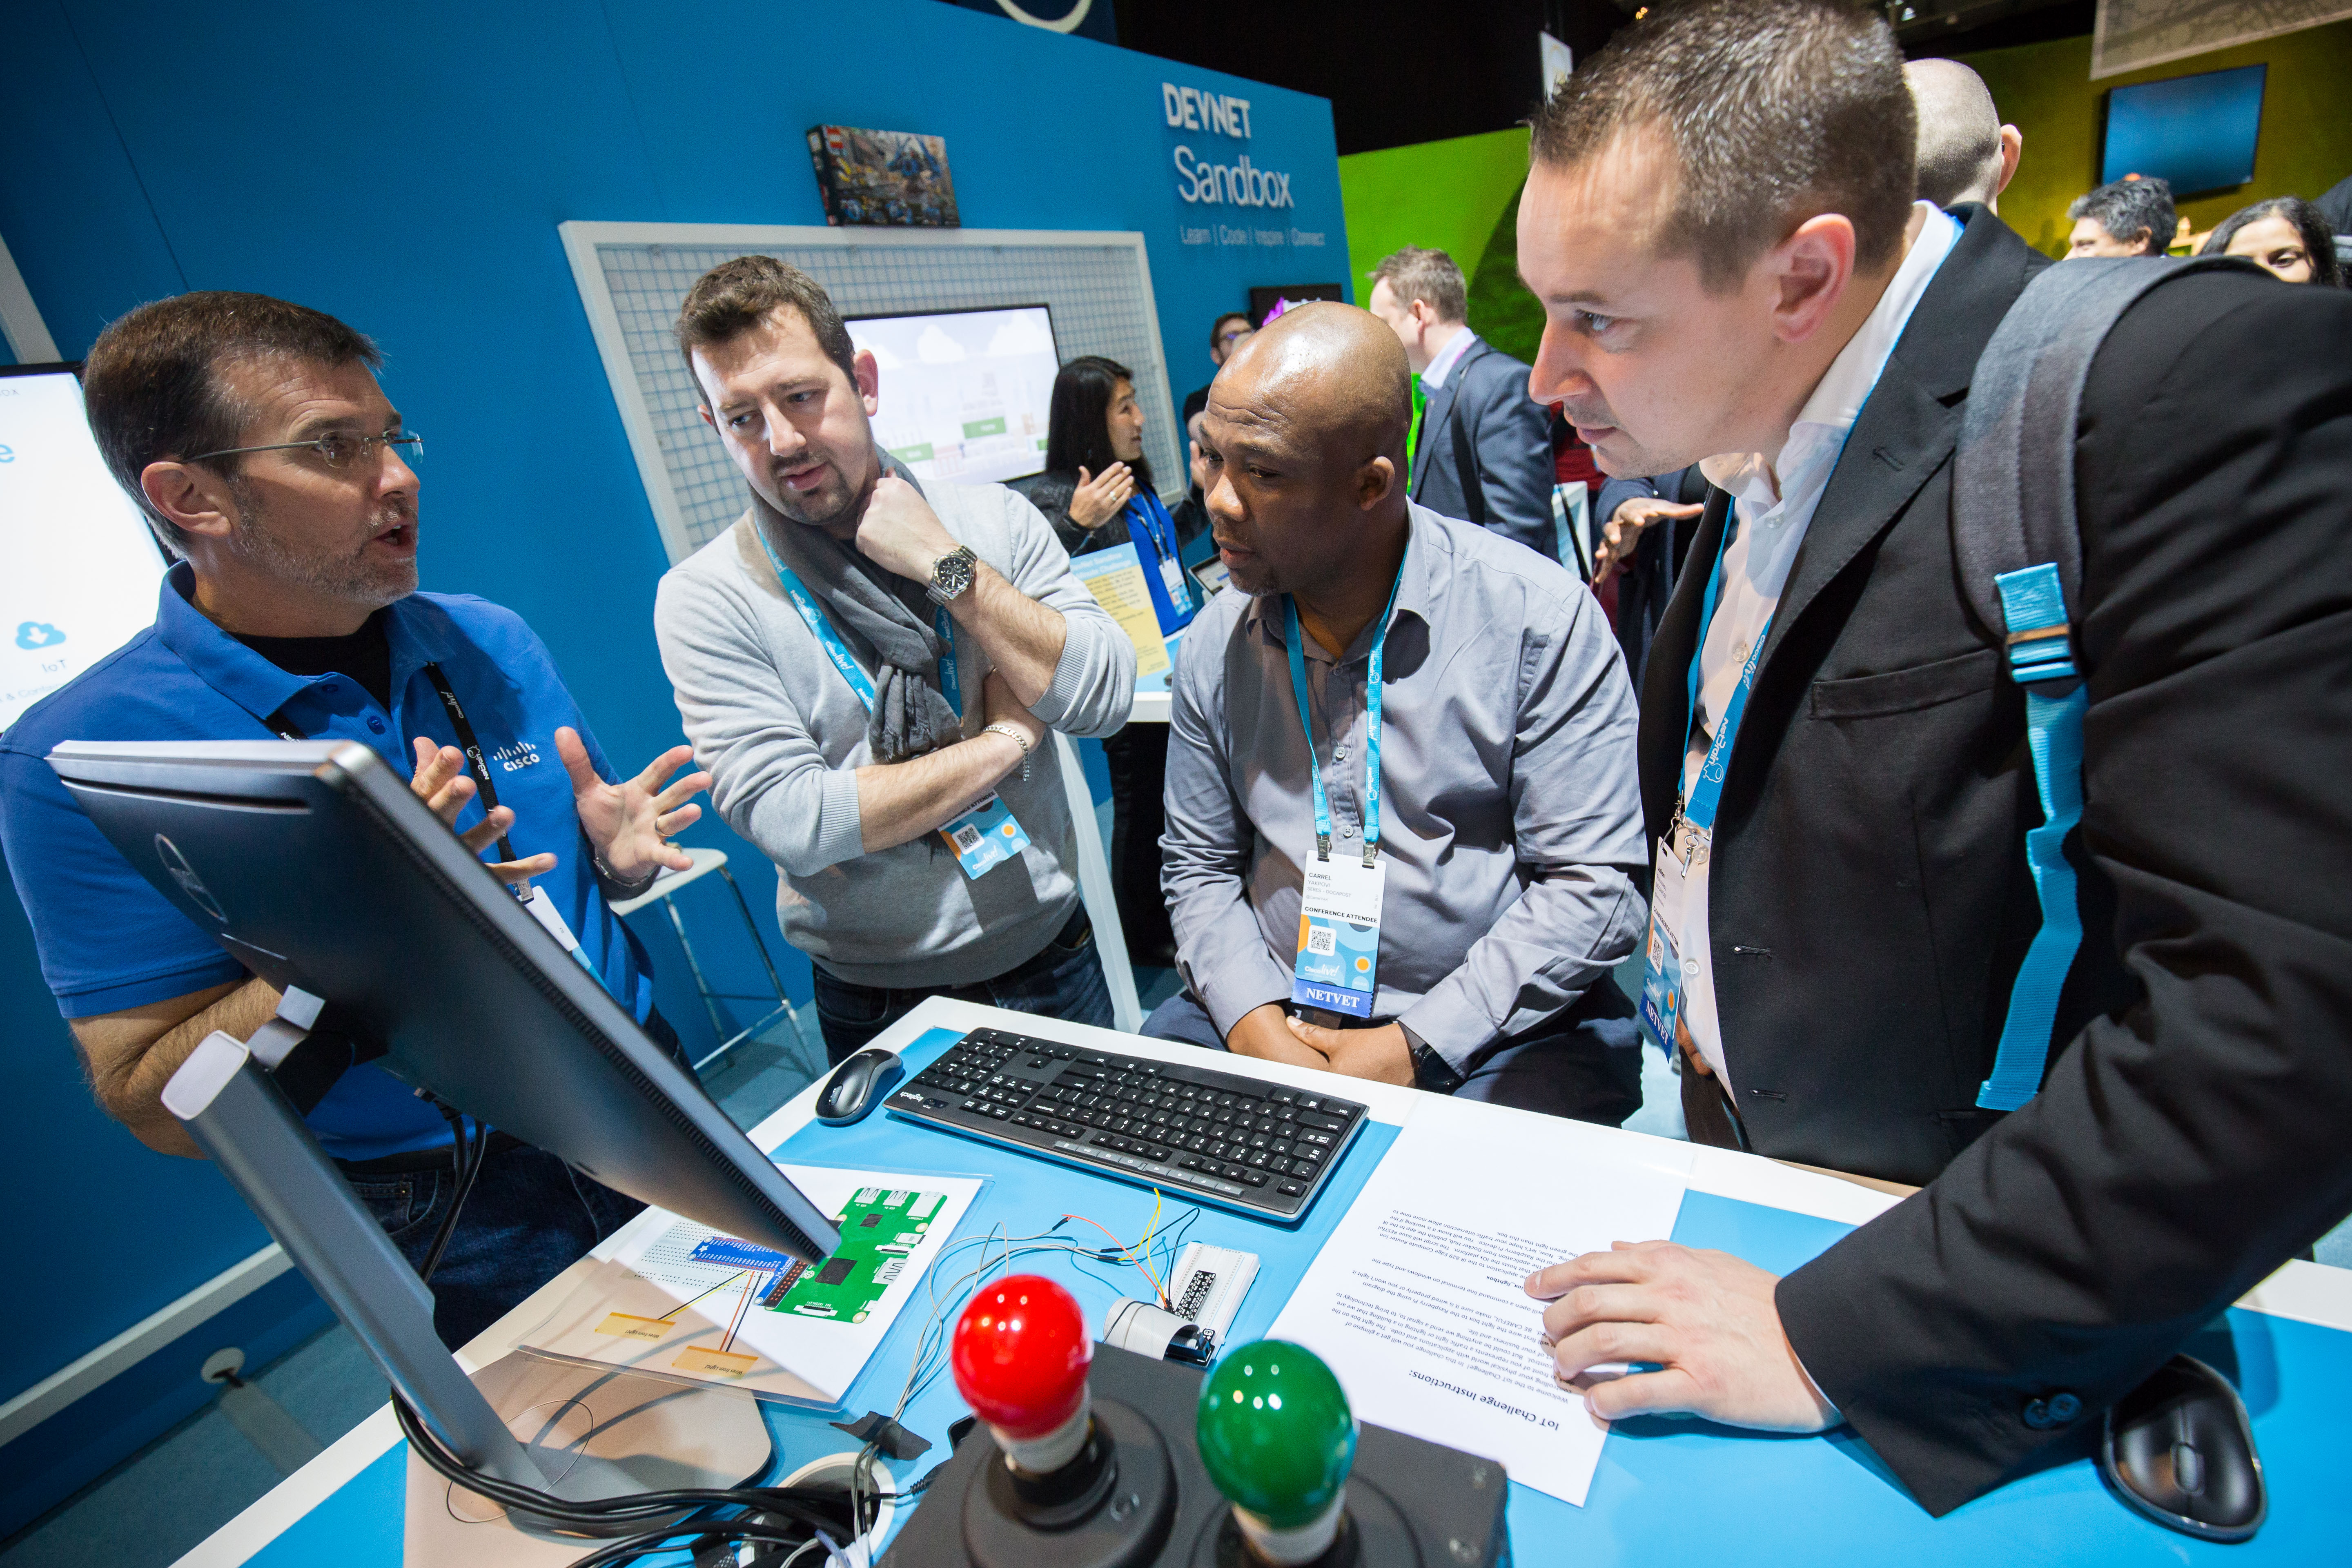 See Stealthwatch Enterprise in the DevNet Zone at Cisco Live